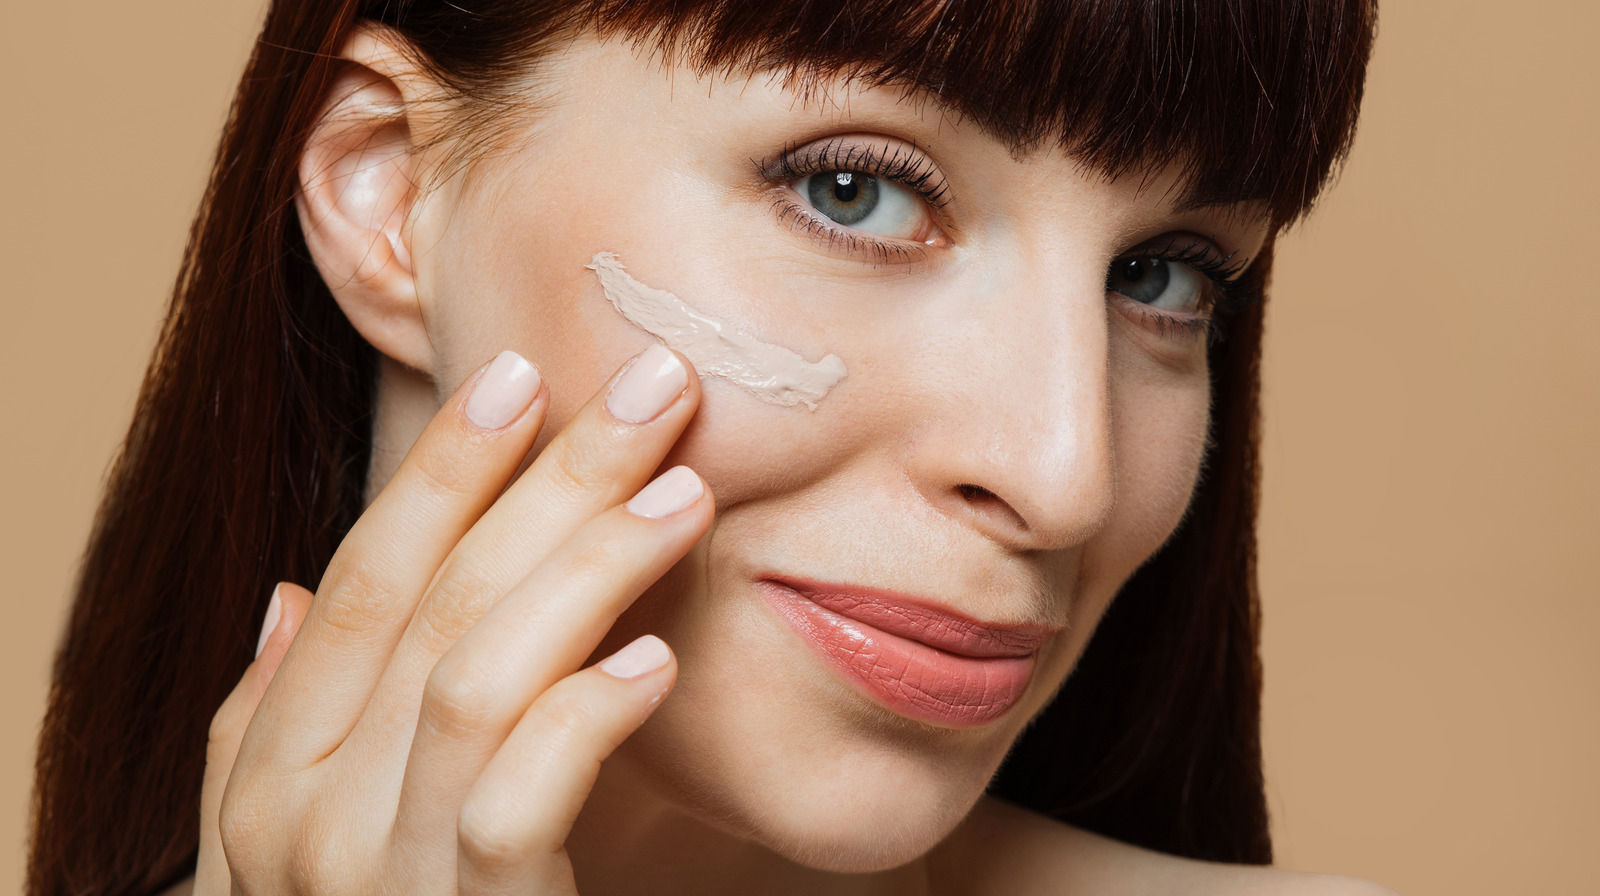 Dermatologist-Approved Ways To DIY Your Own Tinted Moisturizer picture photo